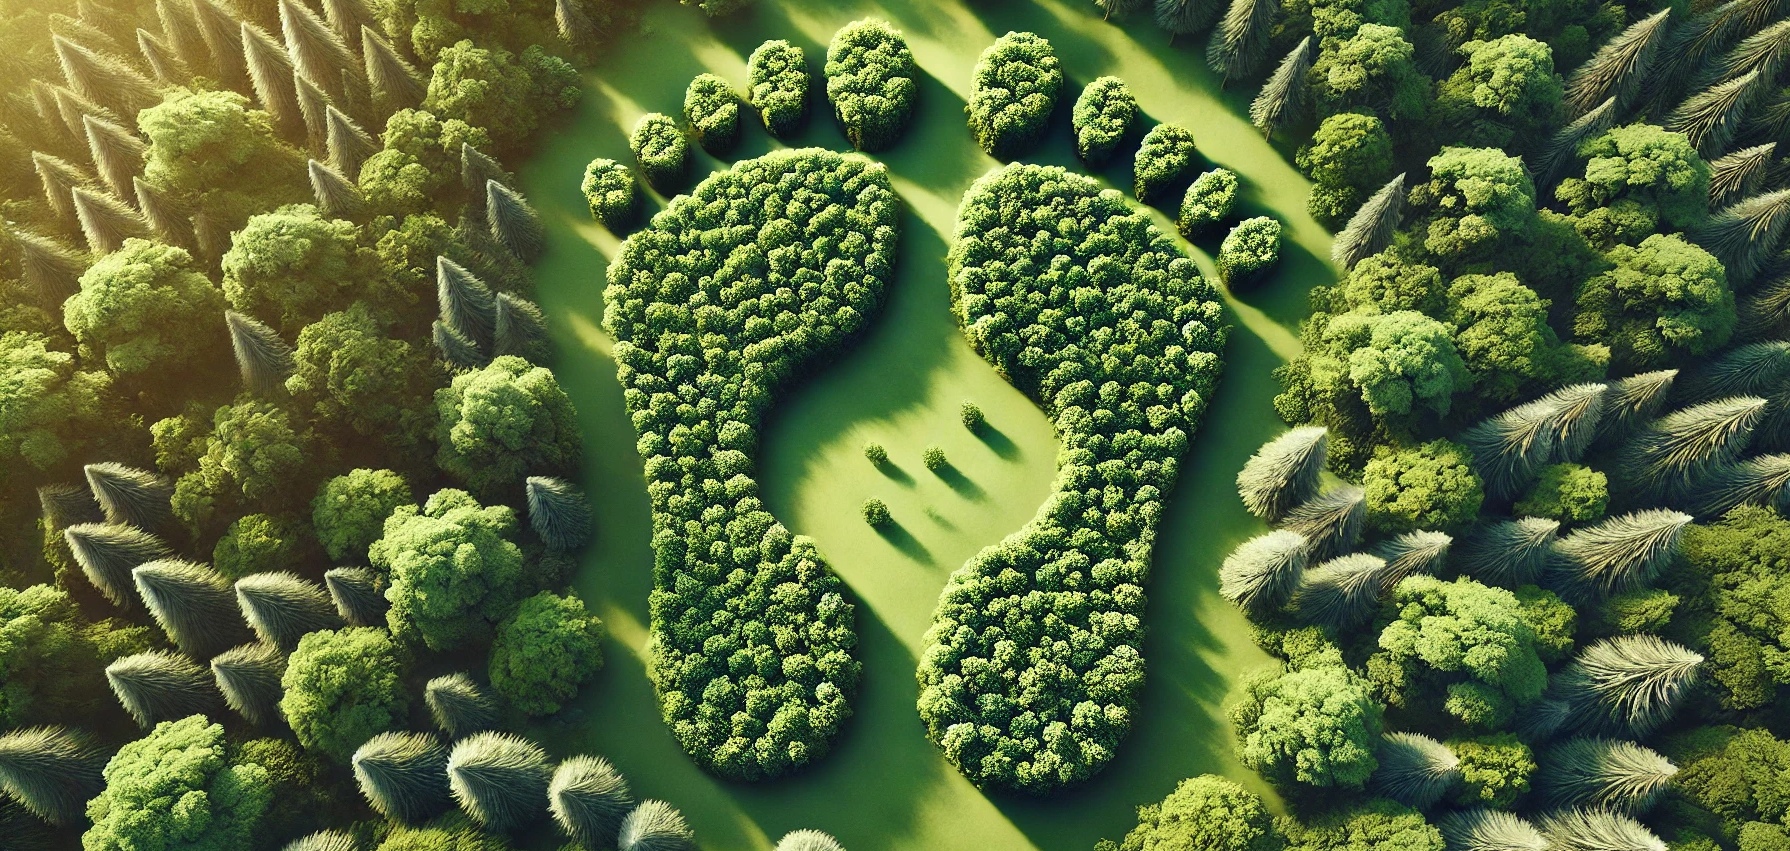 An illustration of a forest with two footprints in the middle made of trees.